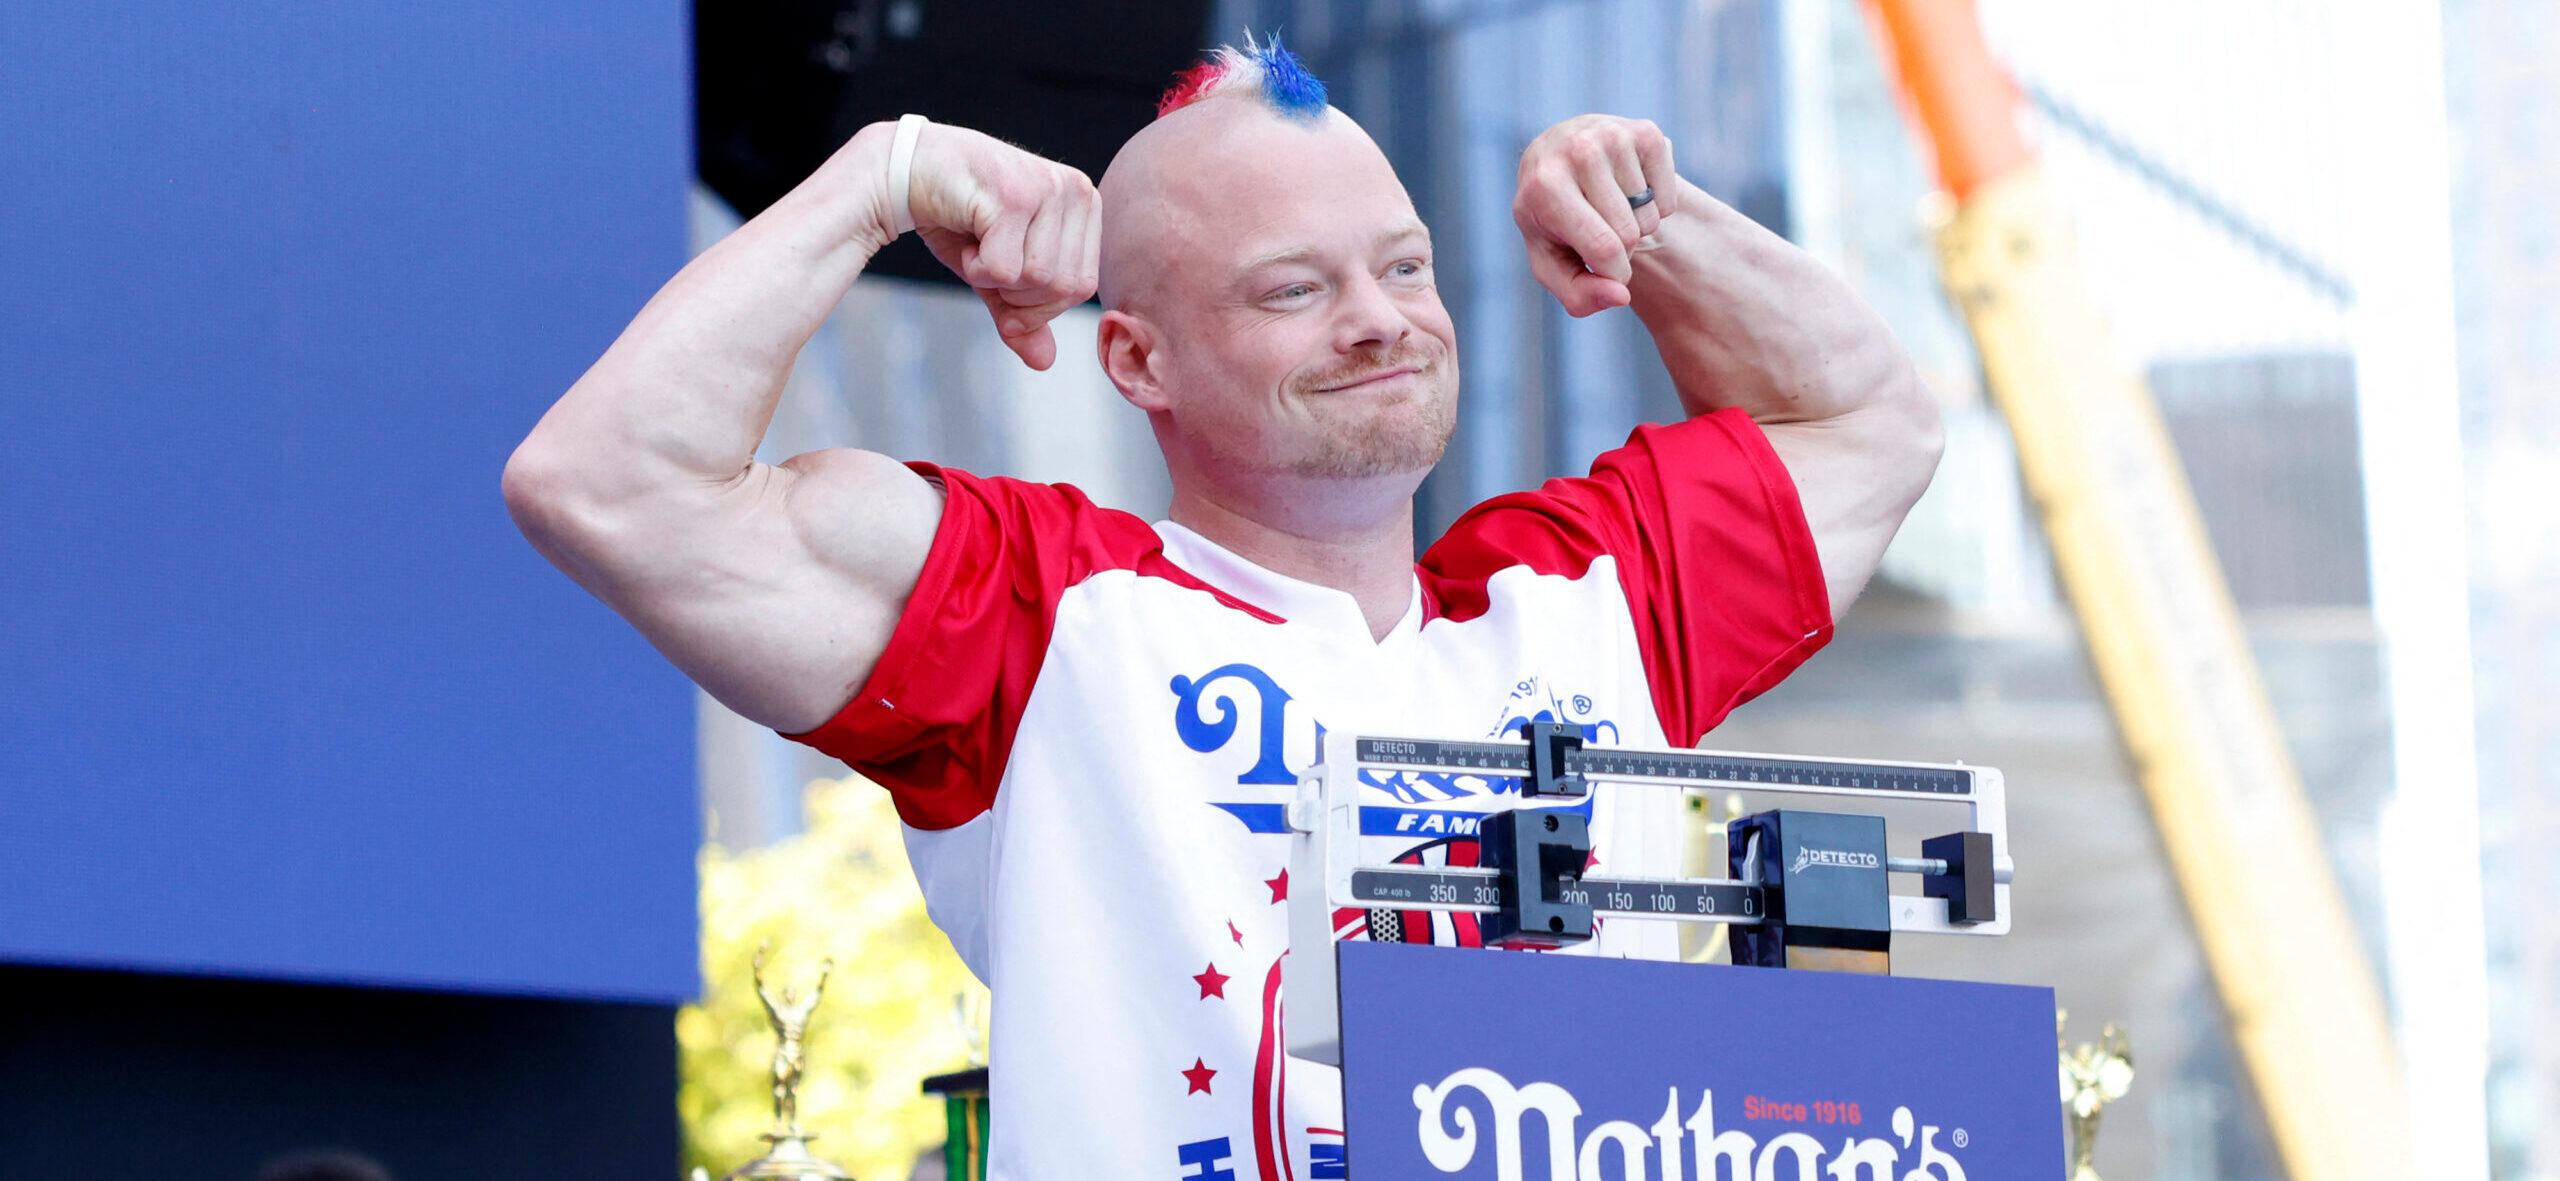 Nick Wehry stands on the scale at the 108th Nathan's Famous Fourth of July International Hot Dog Eating Contest